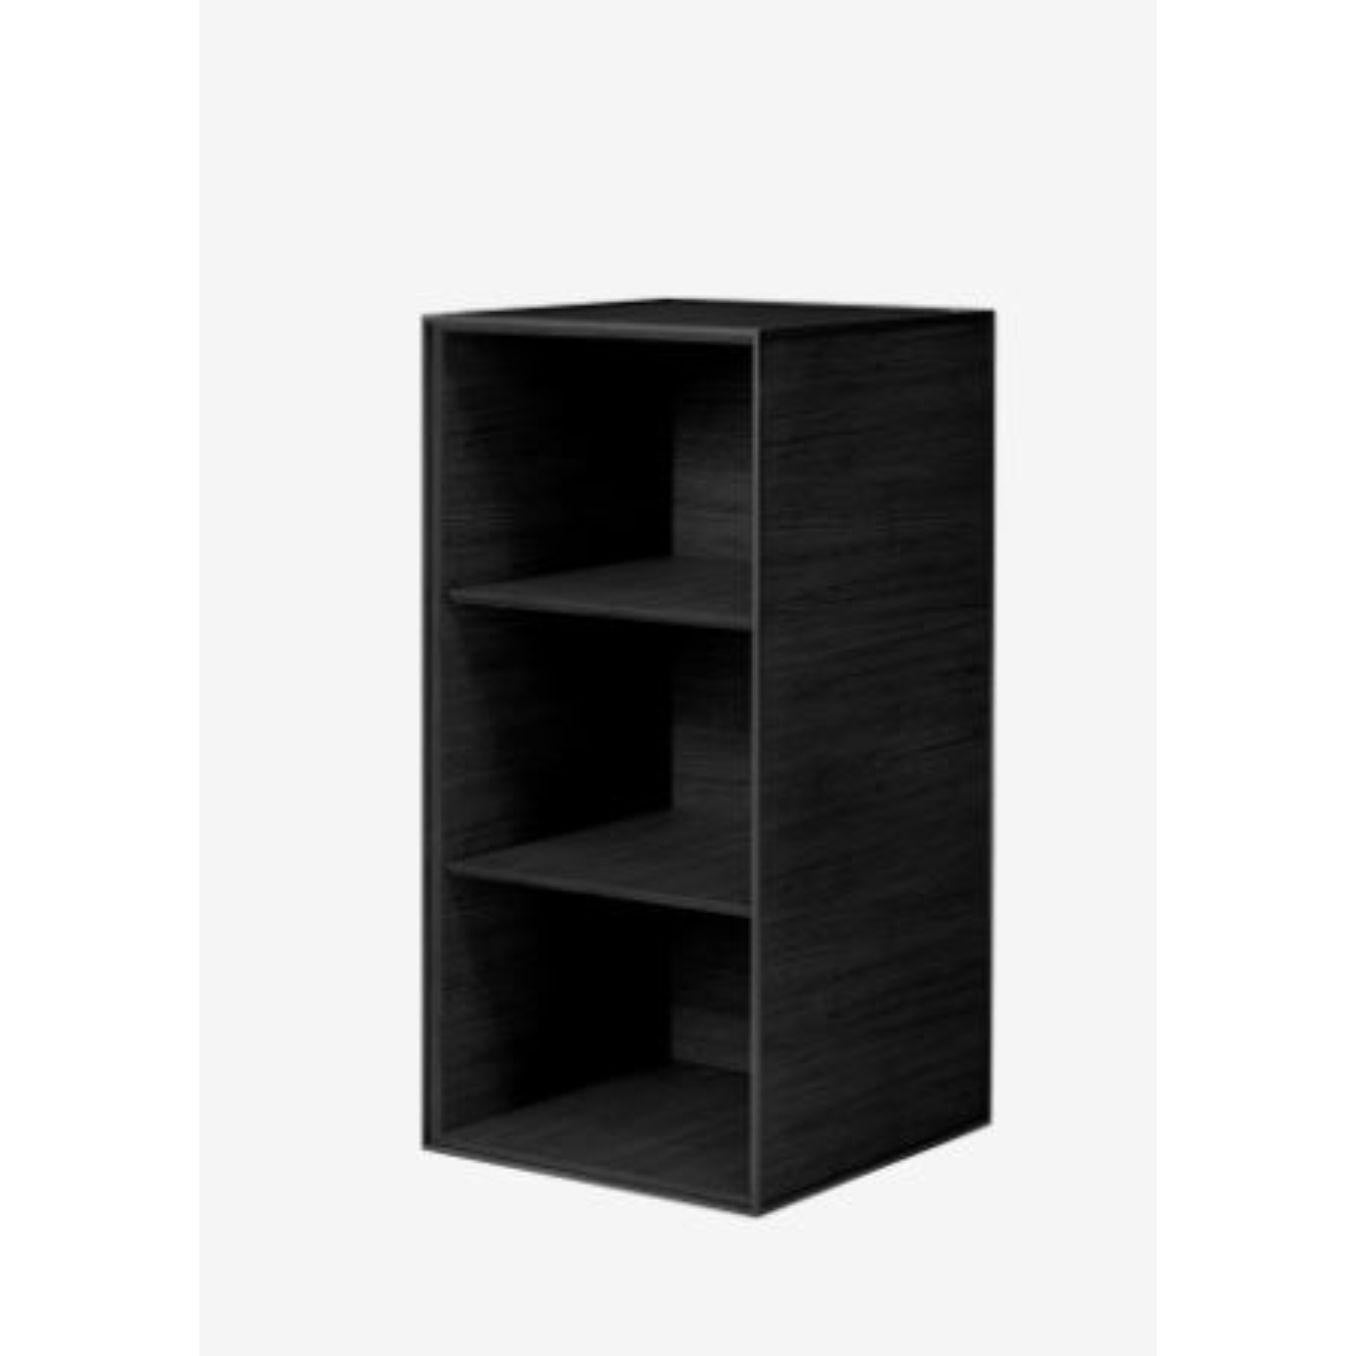 70 Black Ash Frame Box with 2 Shelves by Lassen For Sale 4